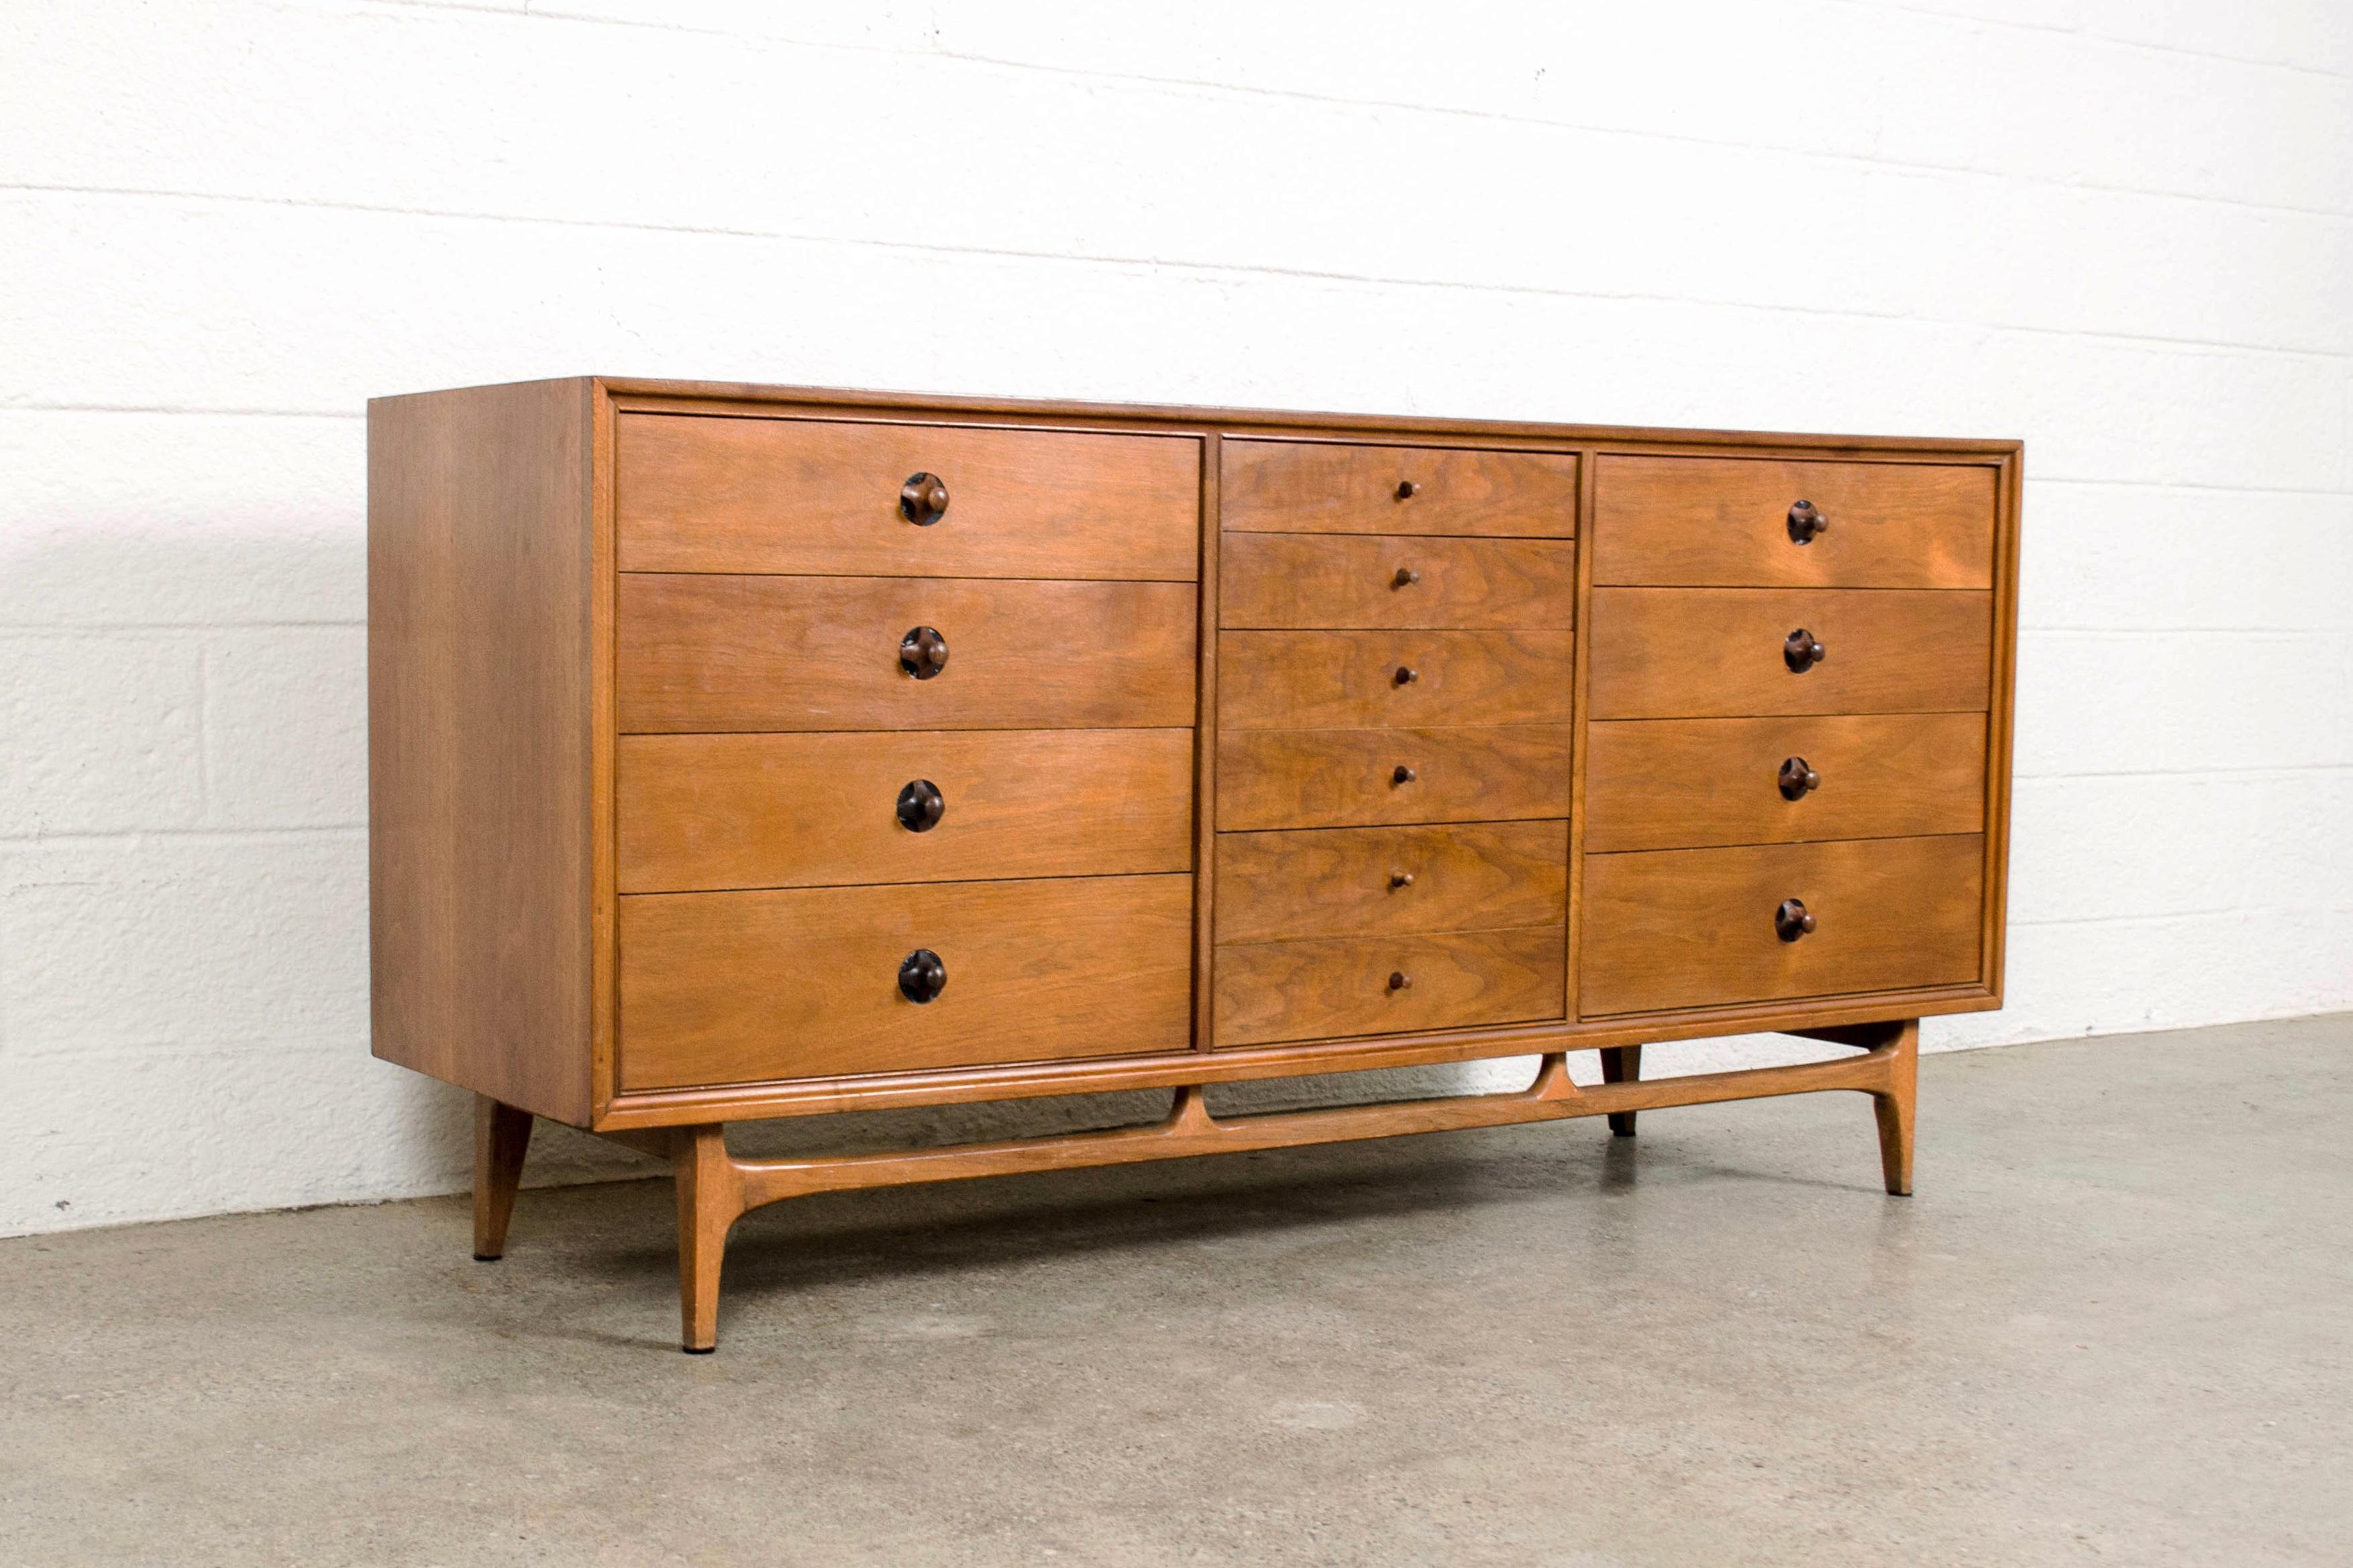 • Exceptional vintage midcentury Thomasville Motif 12-drawer walnut lowboy dresser from 1959.
• Classic Mid-Century Modern styling with clean, elegant lines.
• Well crafted from walnut with gorgeous natural wood grain.
• Distinctive 12-drawer